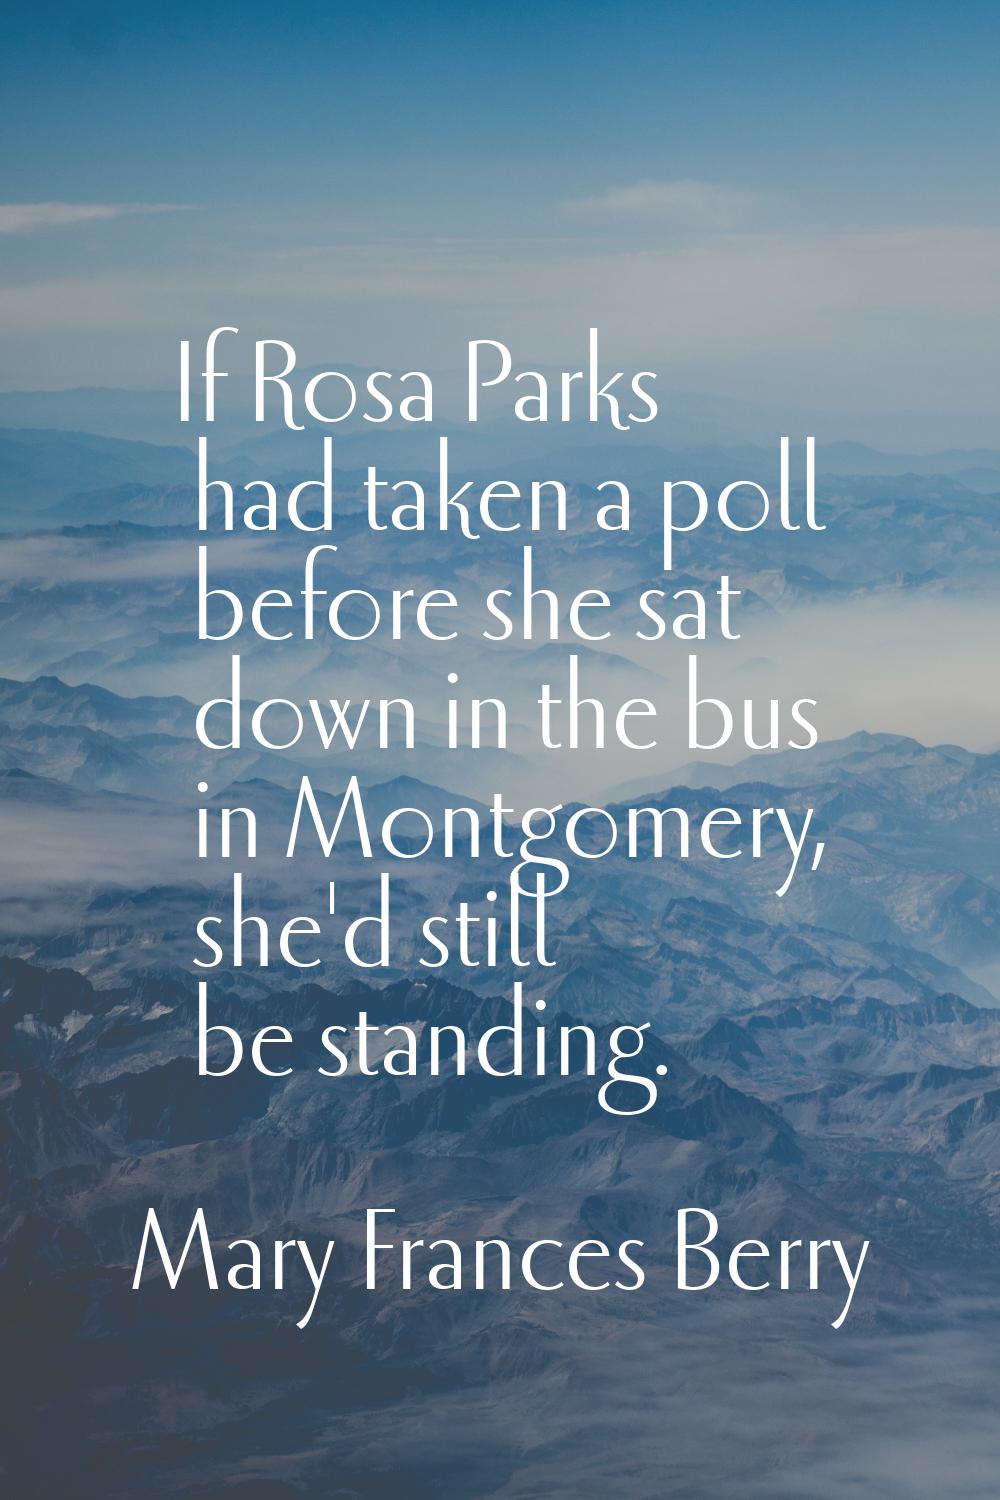 If Rosa Parks had taken a poll before she sat down in the bus in Montgomery, she'd still be standin